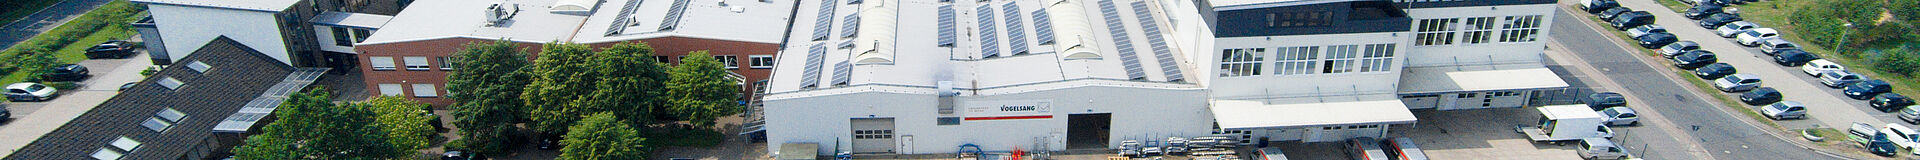 RoadPump - The wastewater disposal from buses by Vogelsang